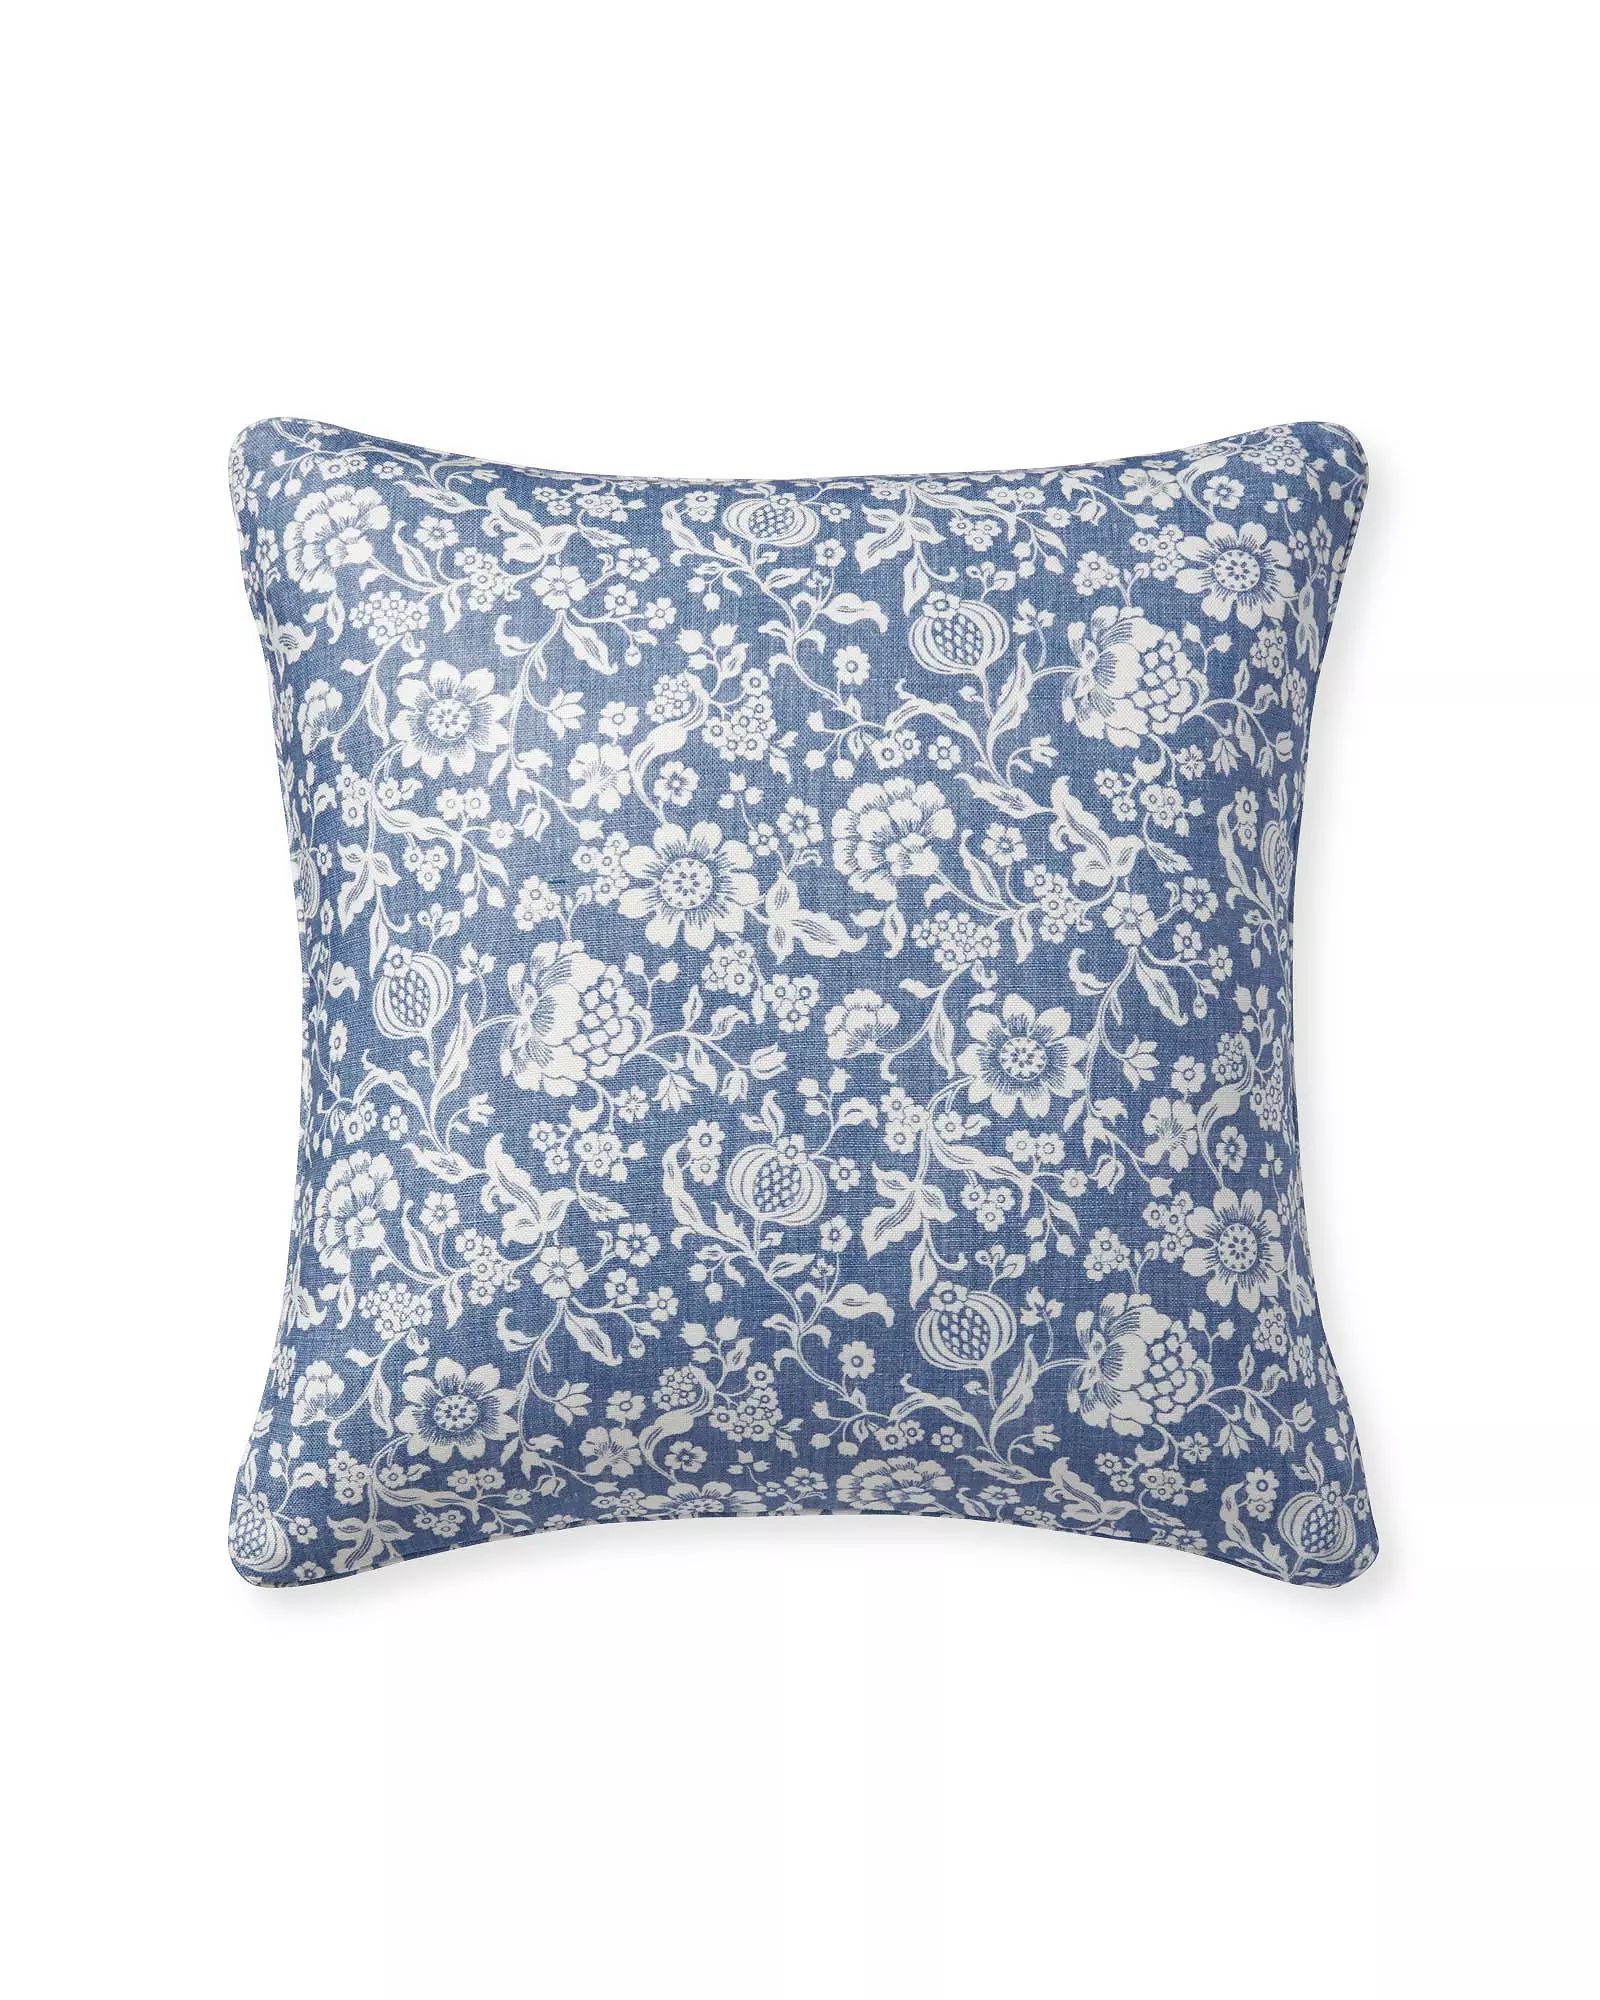 Claremont Petite Pillow Cover | Serena and Lily